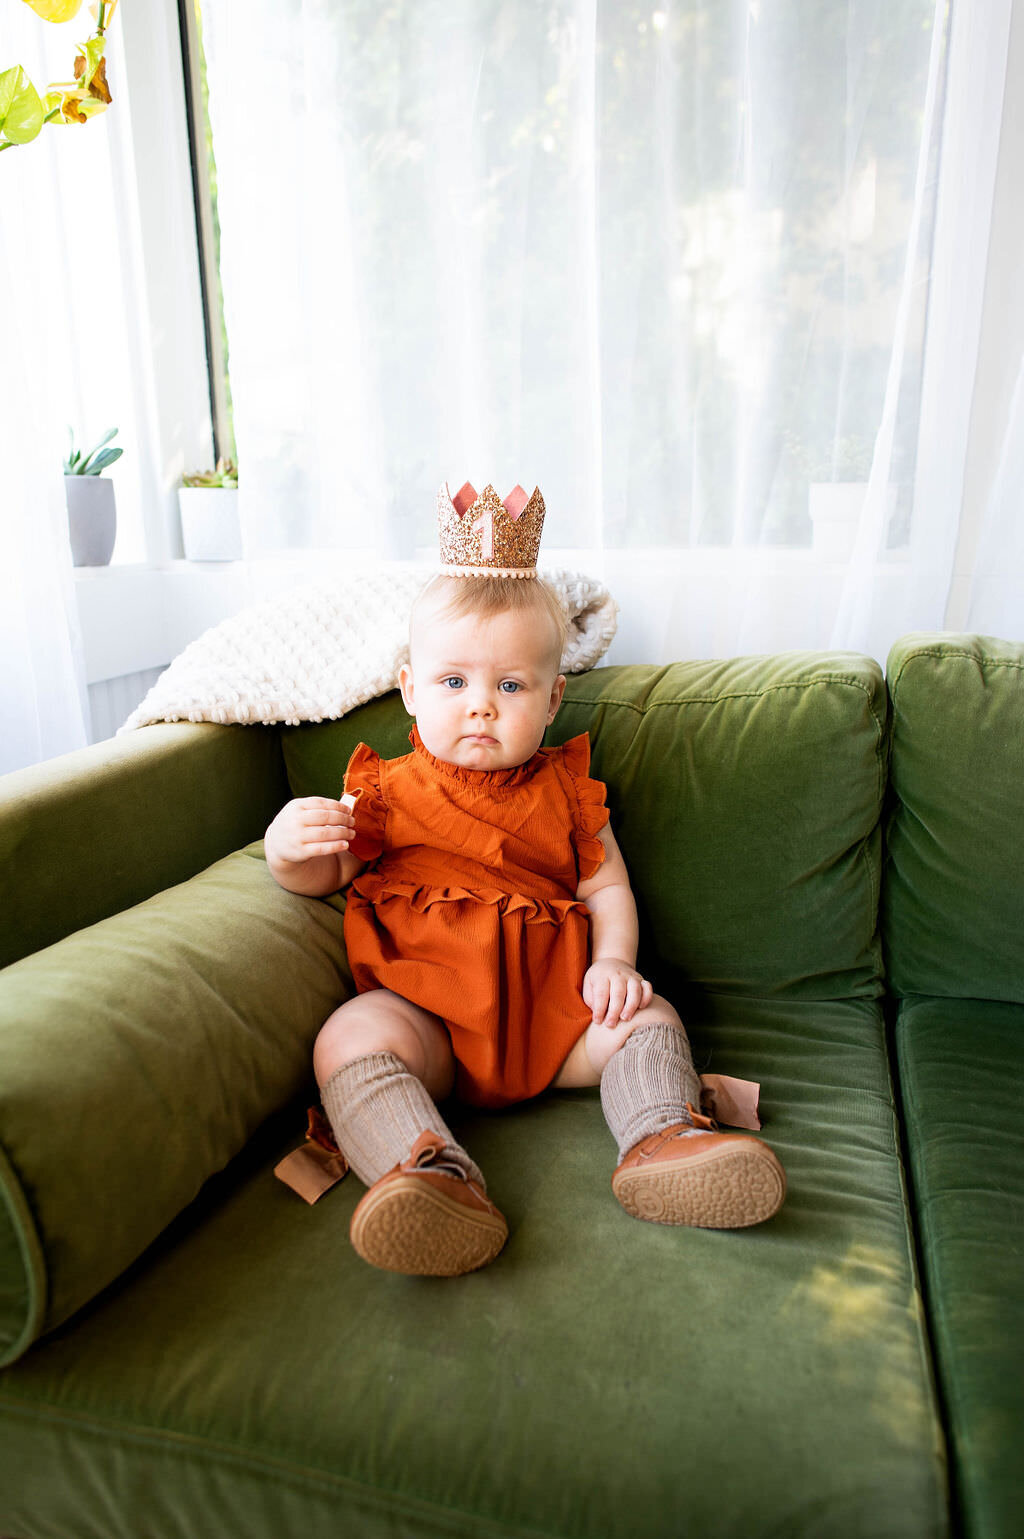 A baby with a "1" crown sitting on a couch.